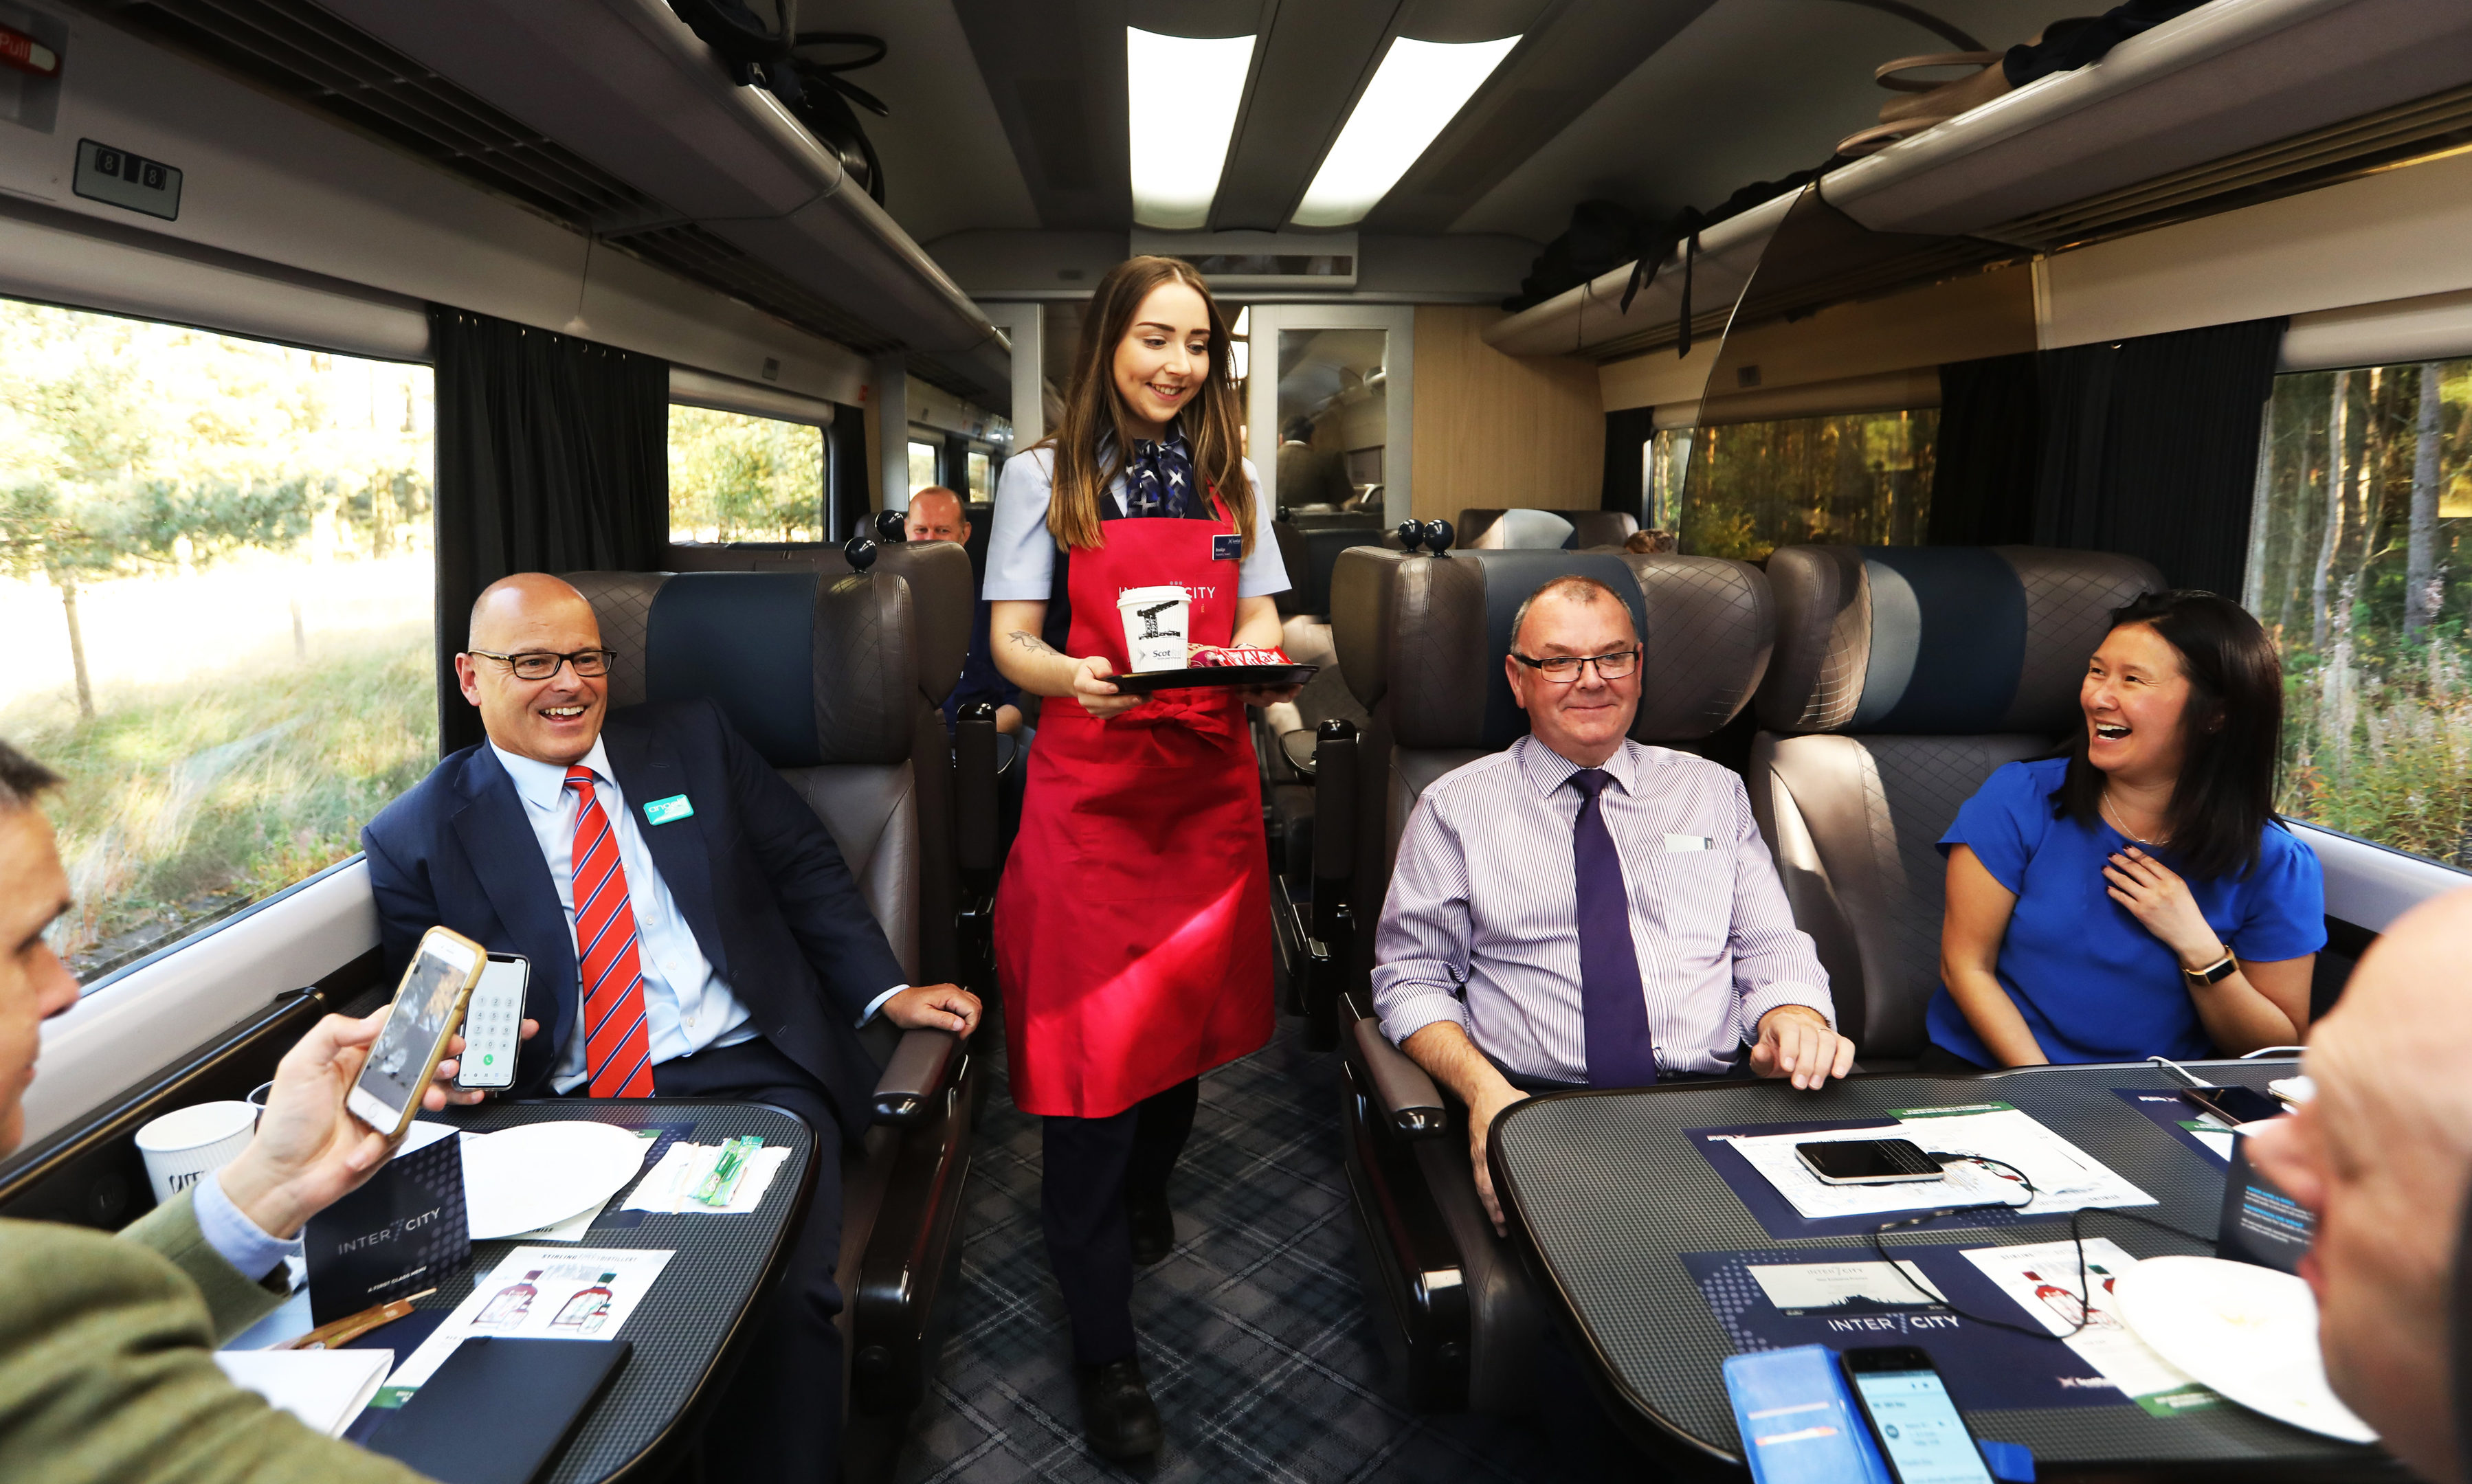 VIDEO: On board ScotRail's new inter-city service with revamped, high ...